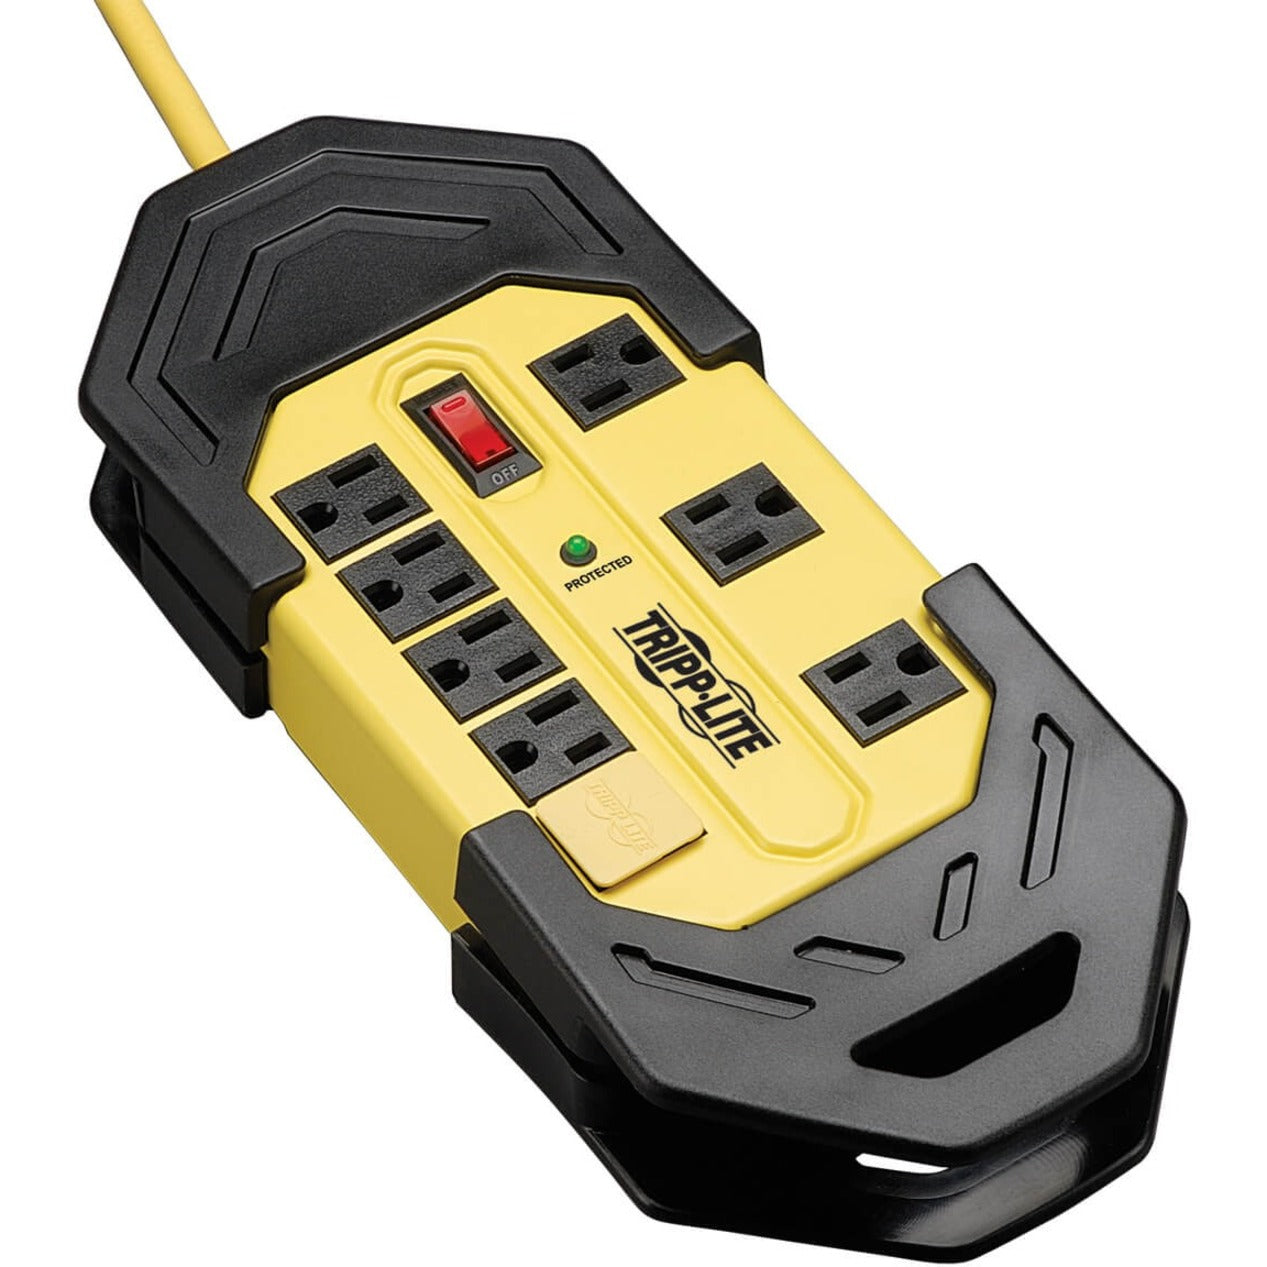 Tripp Lite TLM825SA Protect It! 8-Outlet Safety Surge Suppressor, OSHA Yellow, 25ft Cord, 3600J